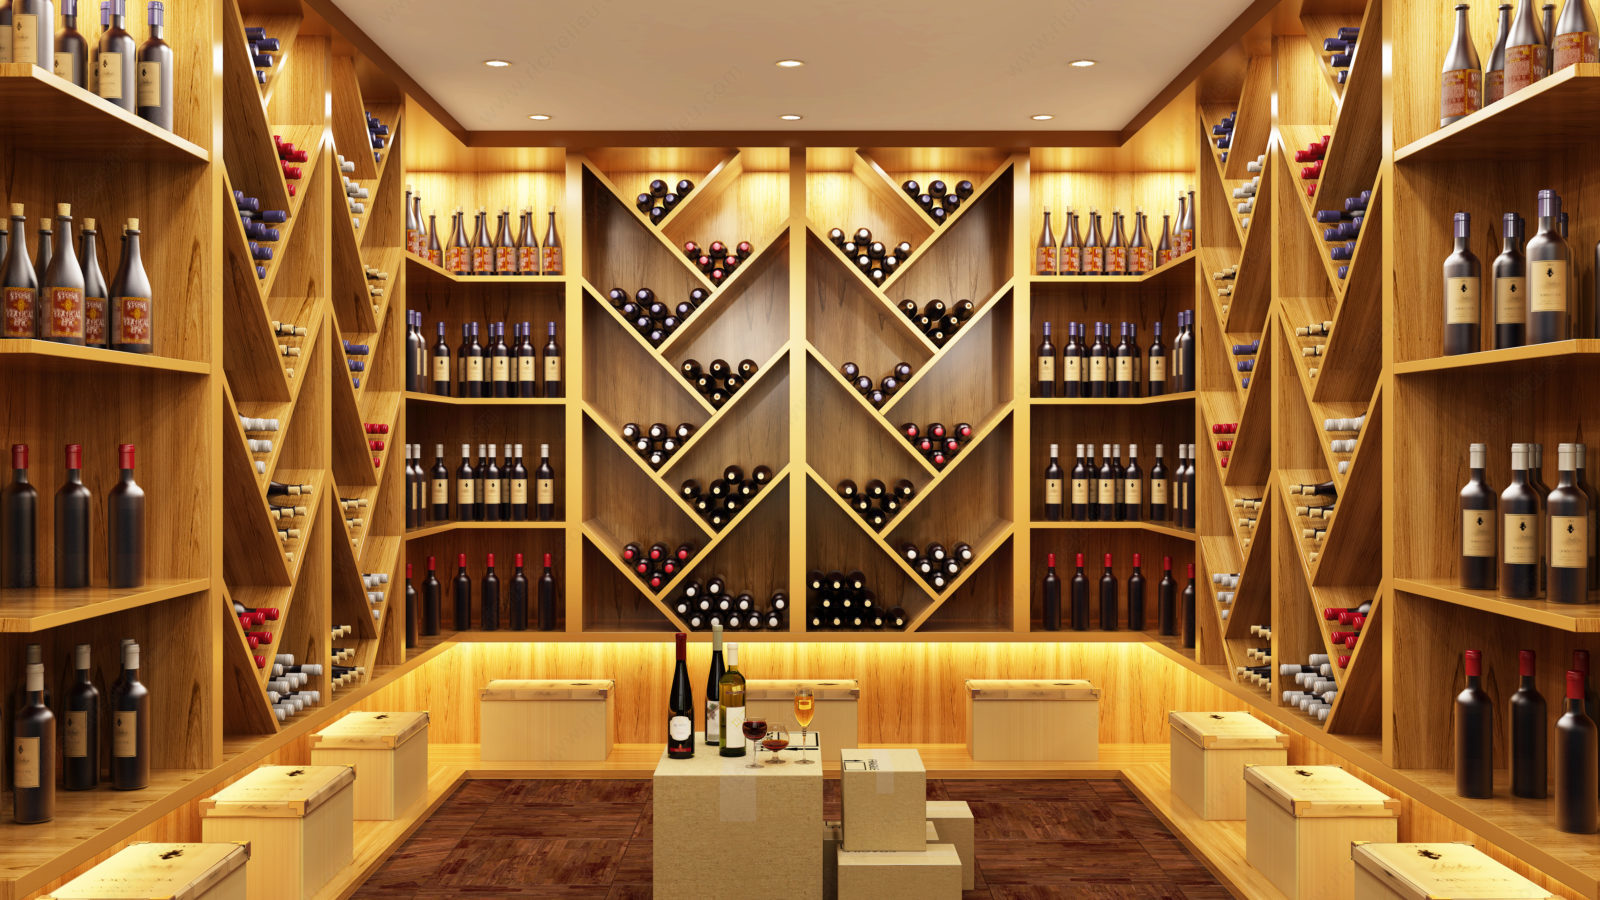 The essential products for an ultimate wine cellar